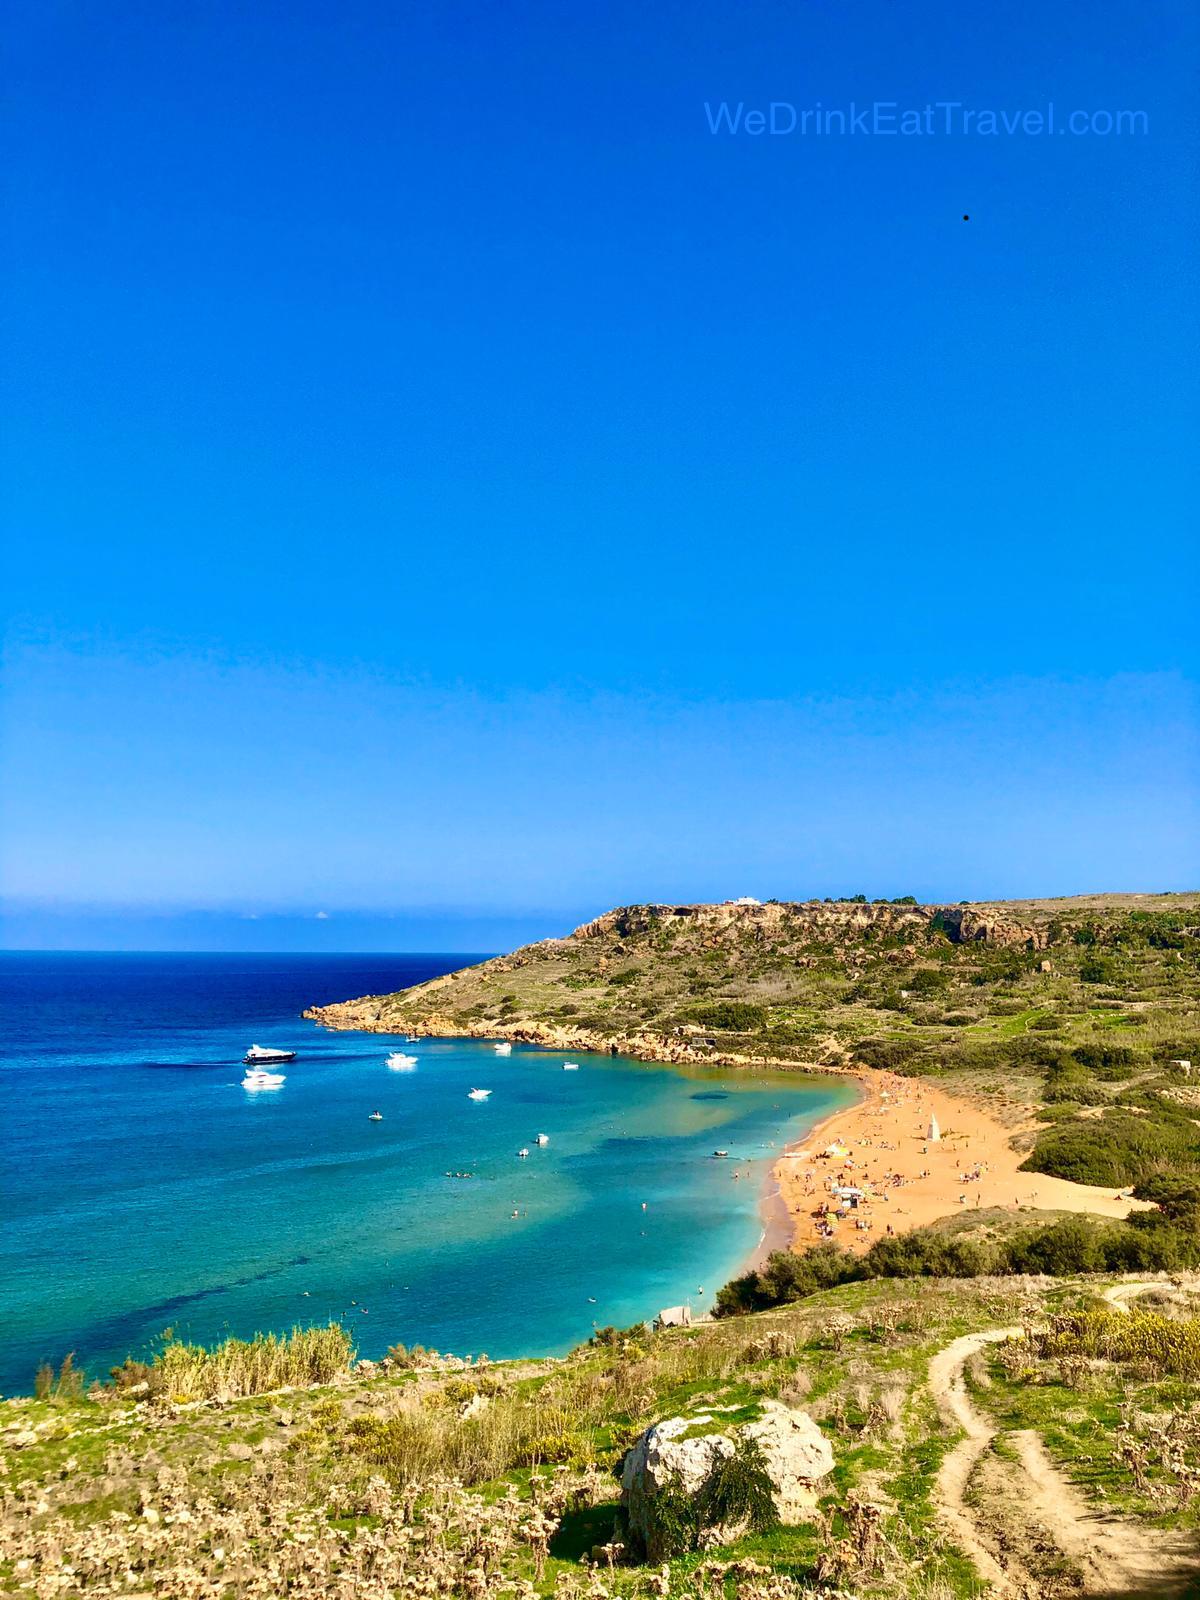 15 Top Things To Do In Gozo Malta - We Drink Eat Travel